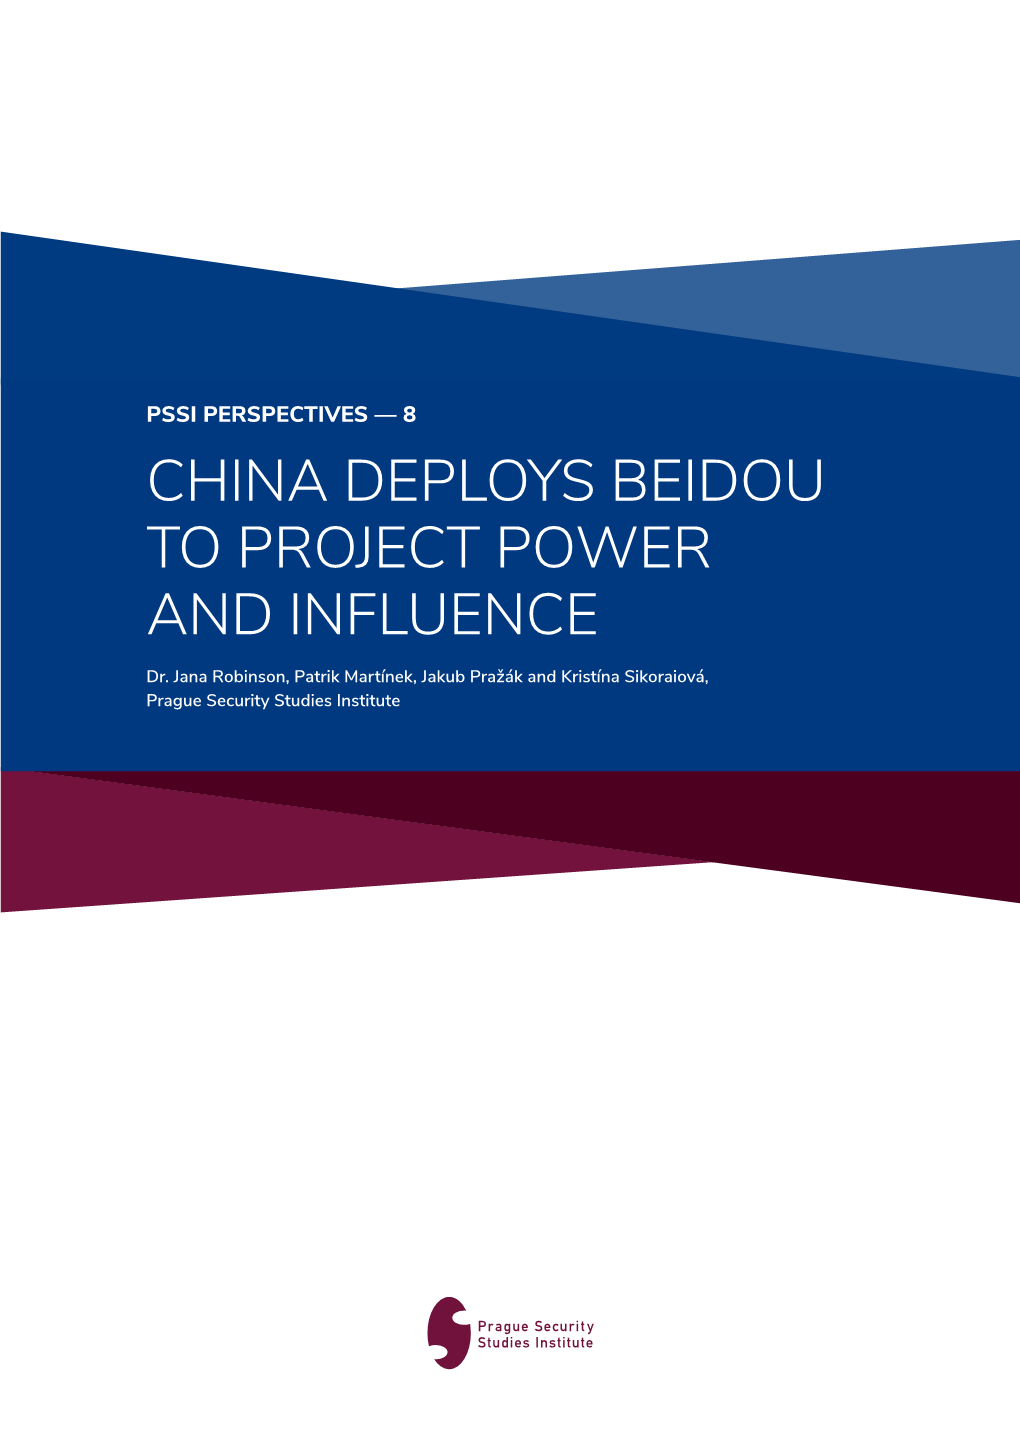 China Deploys Beidou to Project Power and Influence